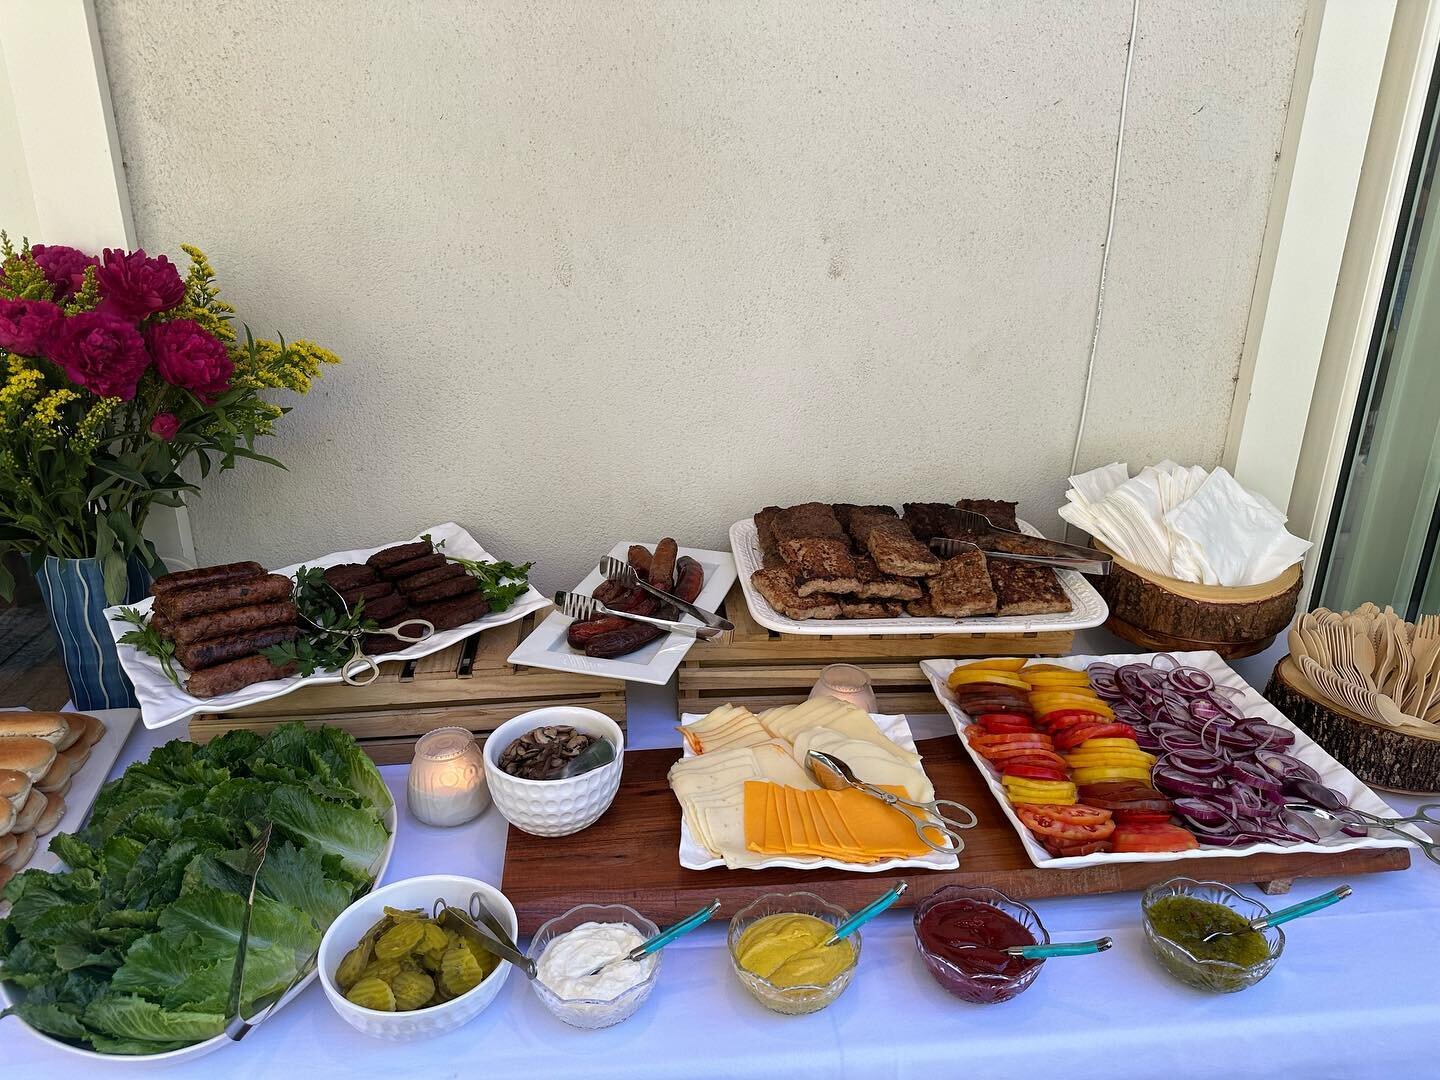 Chef Manny Catering ⭐️
We make your event a success 🤩
323 509 1707 
manny_chef@icloud.com

#privatechef #lafarmersmarket #lafood #insta #lafoodblogger #lafoodieguy #losangeles #california #usa #love 
#thesalvichef #happiness #instamood #instadaily #